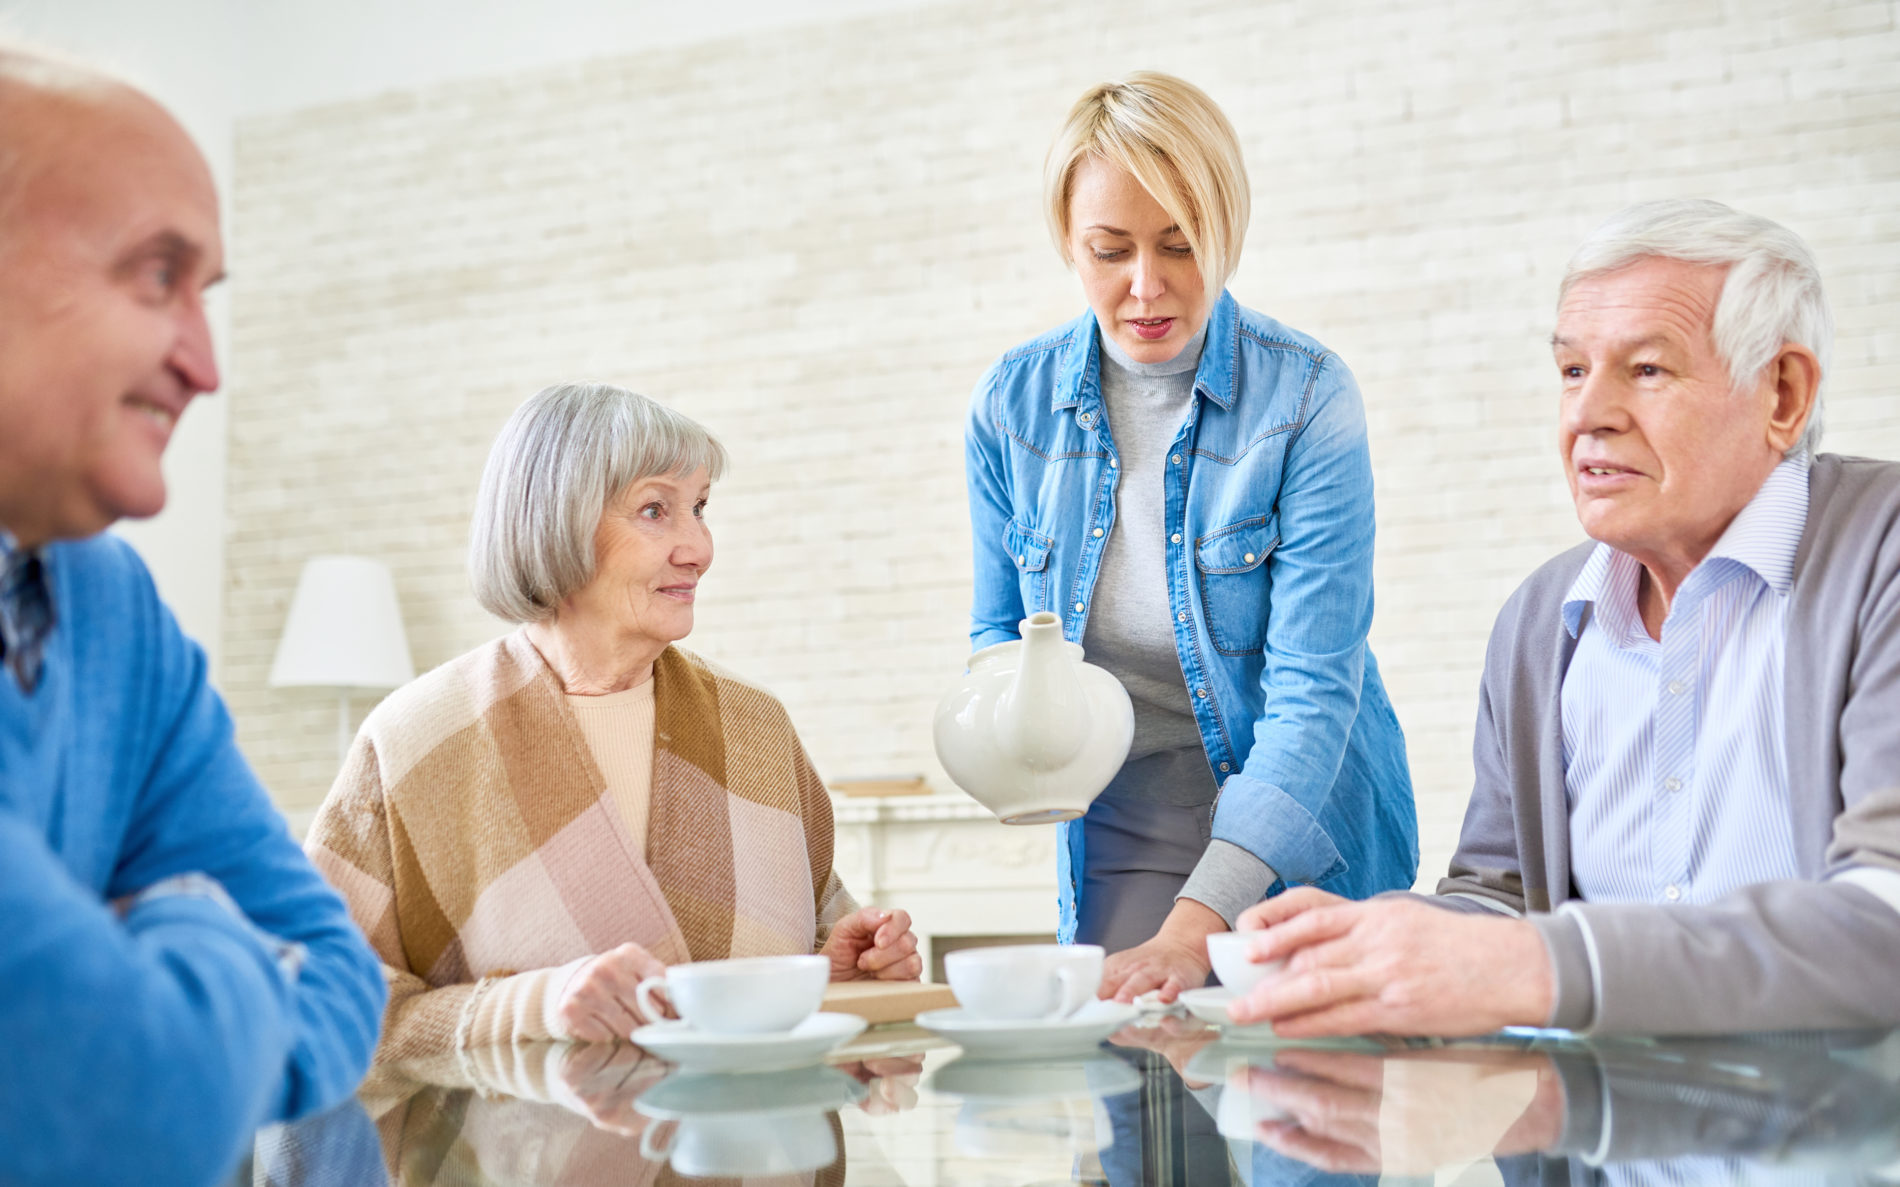 Woman pouring tea for senior patients in assisted living home sitting at table and chatting.